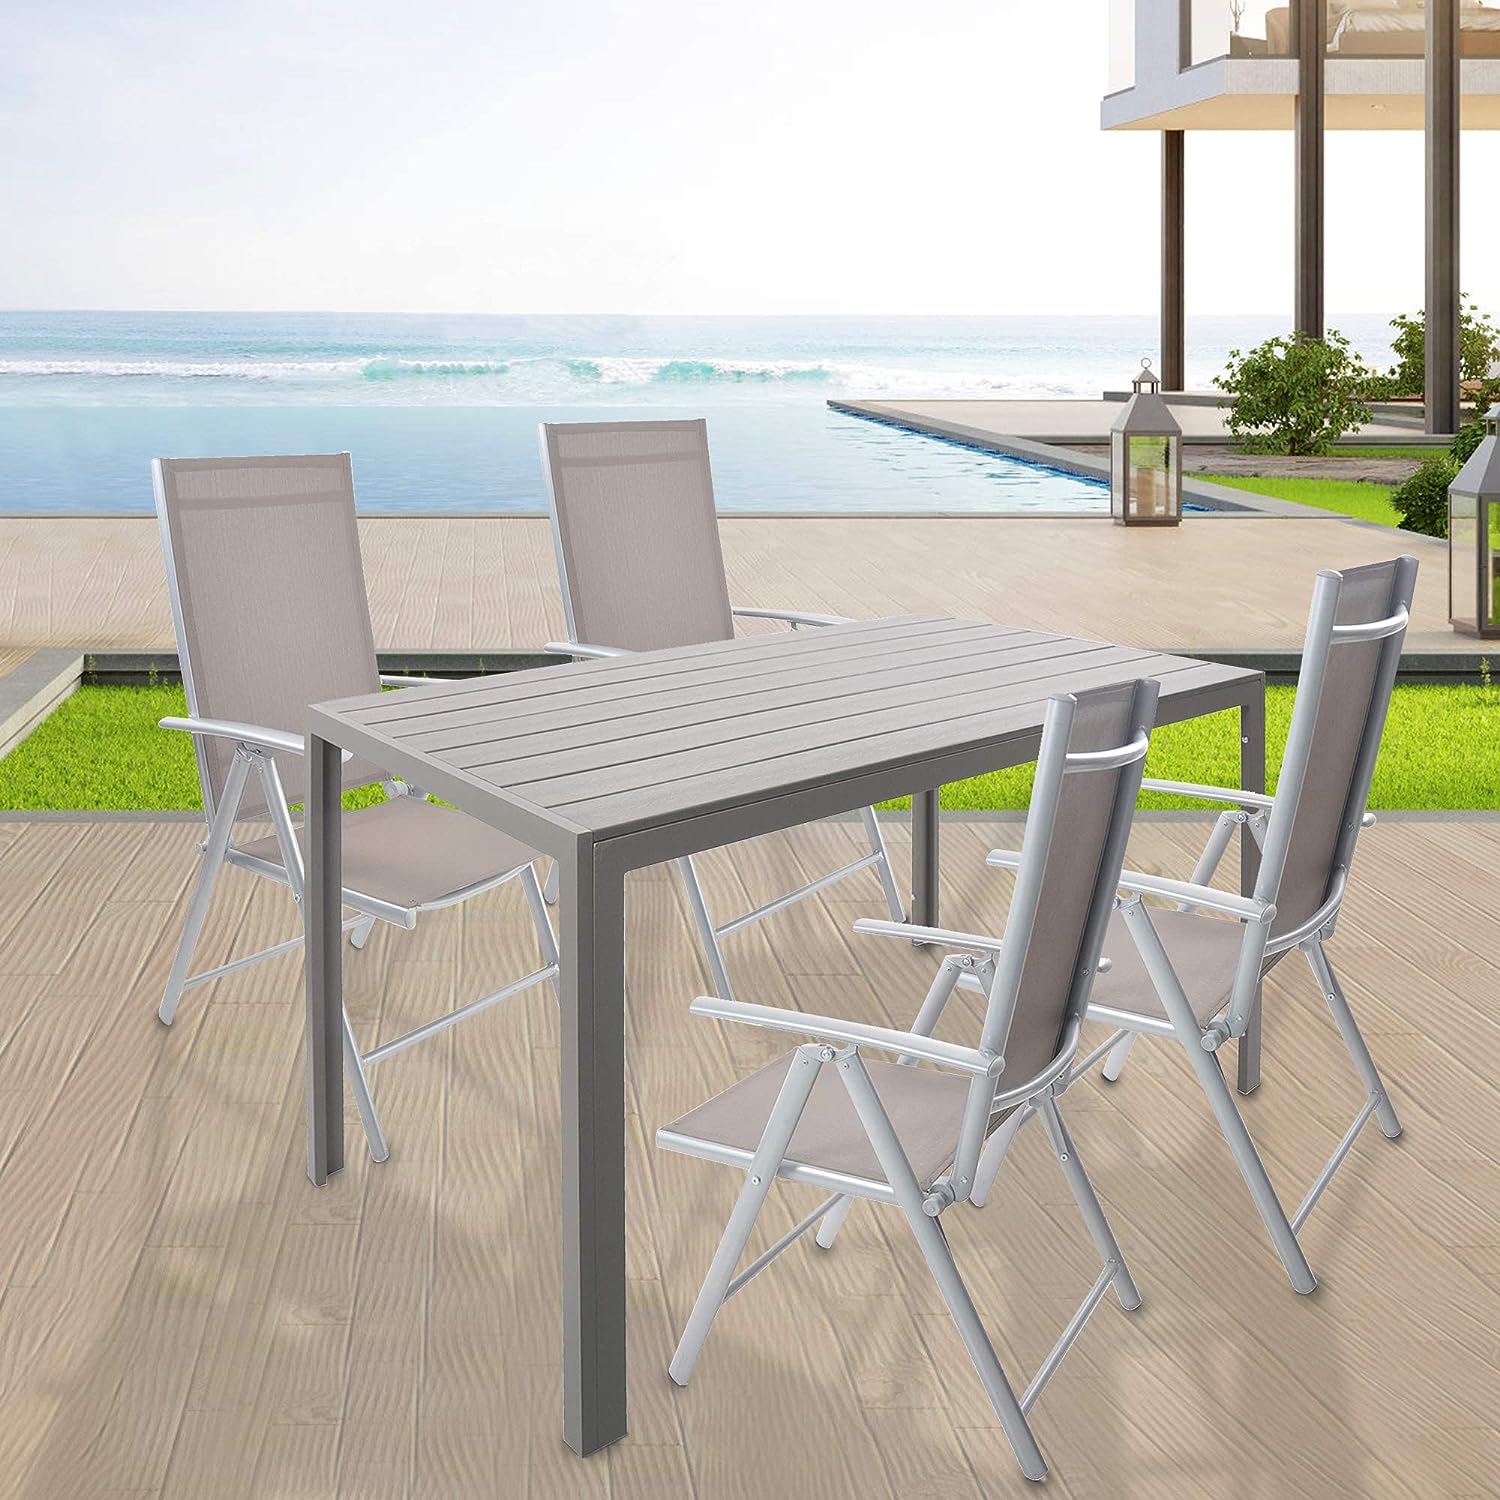 5 Piece Outdoor Patio Table Set, 1 Dining Table 55" for 4-6 with 4 Folding Chairs Aluminum Frame Outdoor Dining Set